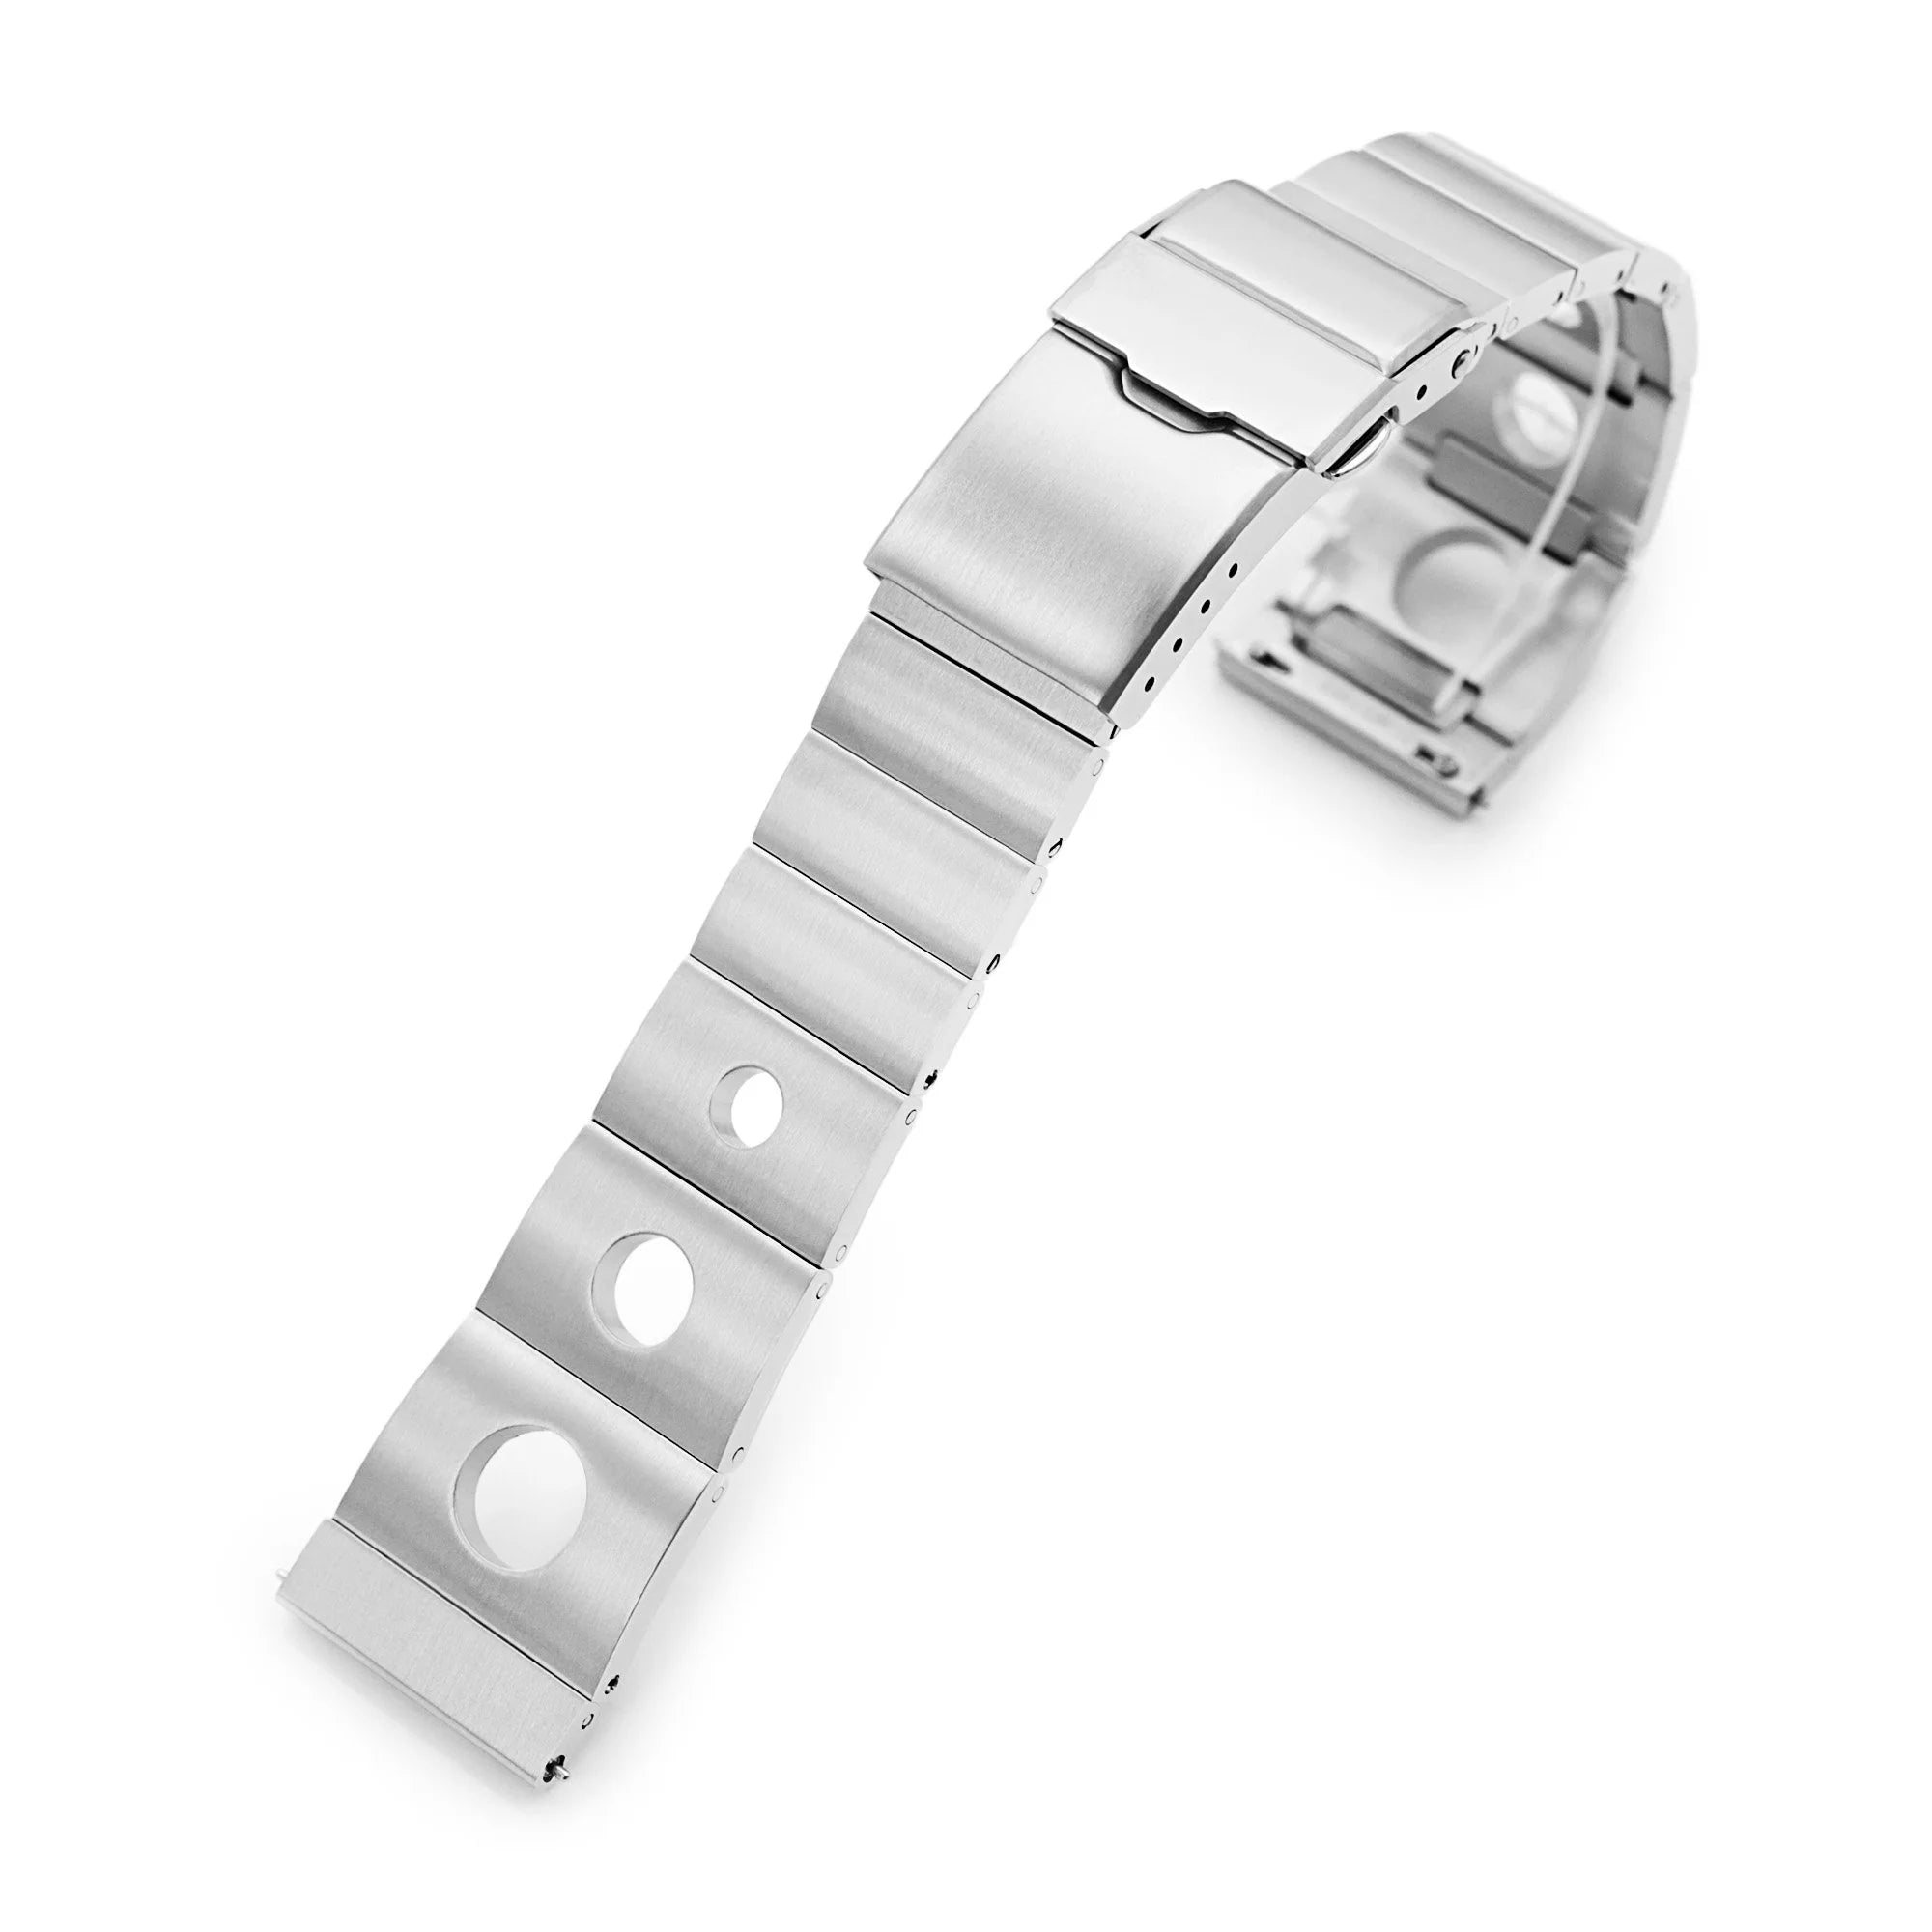 [STRAPCODE] Quick Release Rollball V2 Steel Bracelet with Divers Deployant Clasp